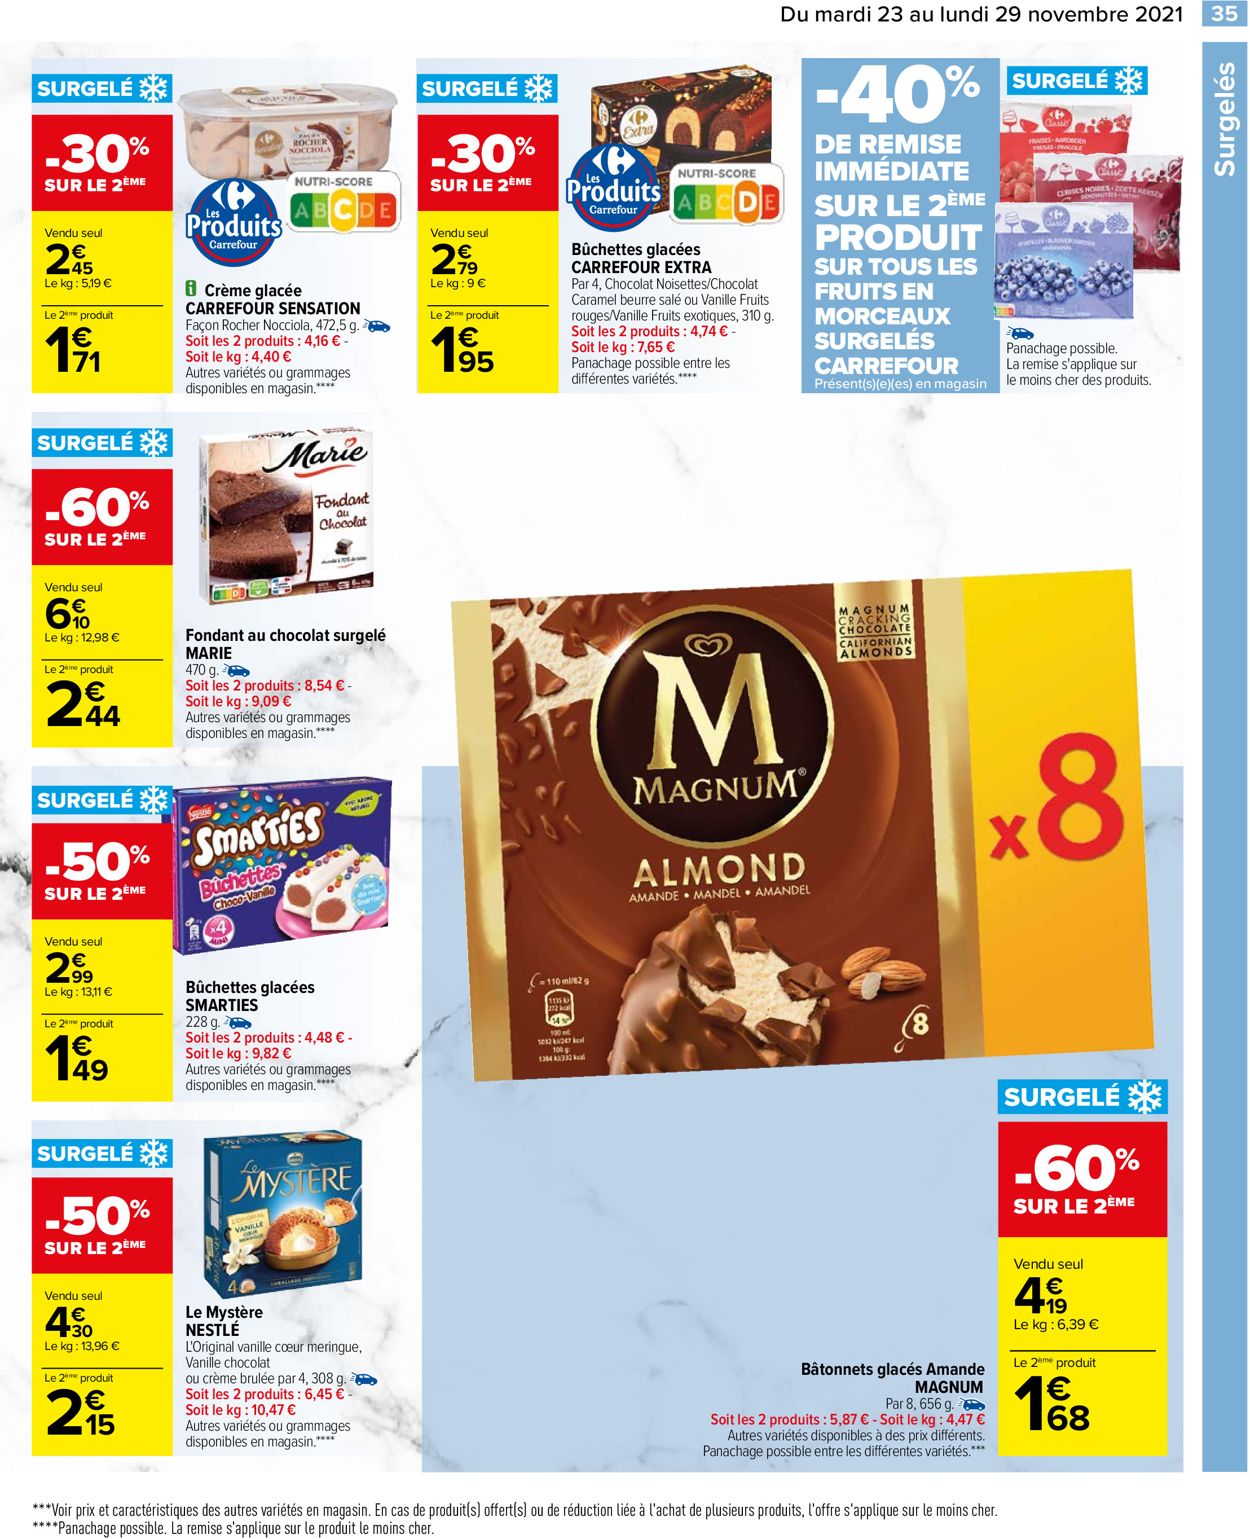 Carrefour BLACK WEEK 2021 Catalogue - 23.11-29.11.2021 (Page 35)